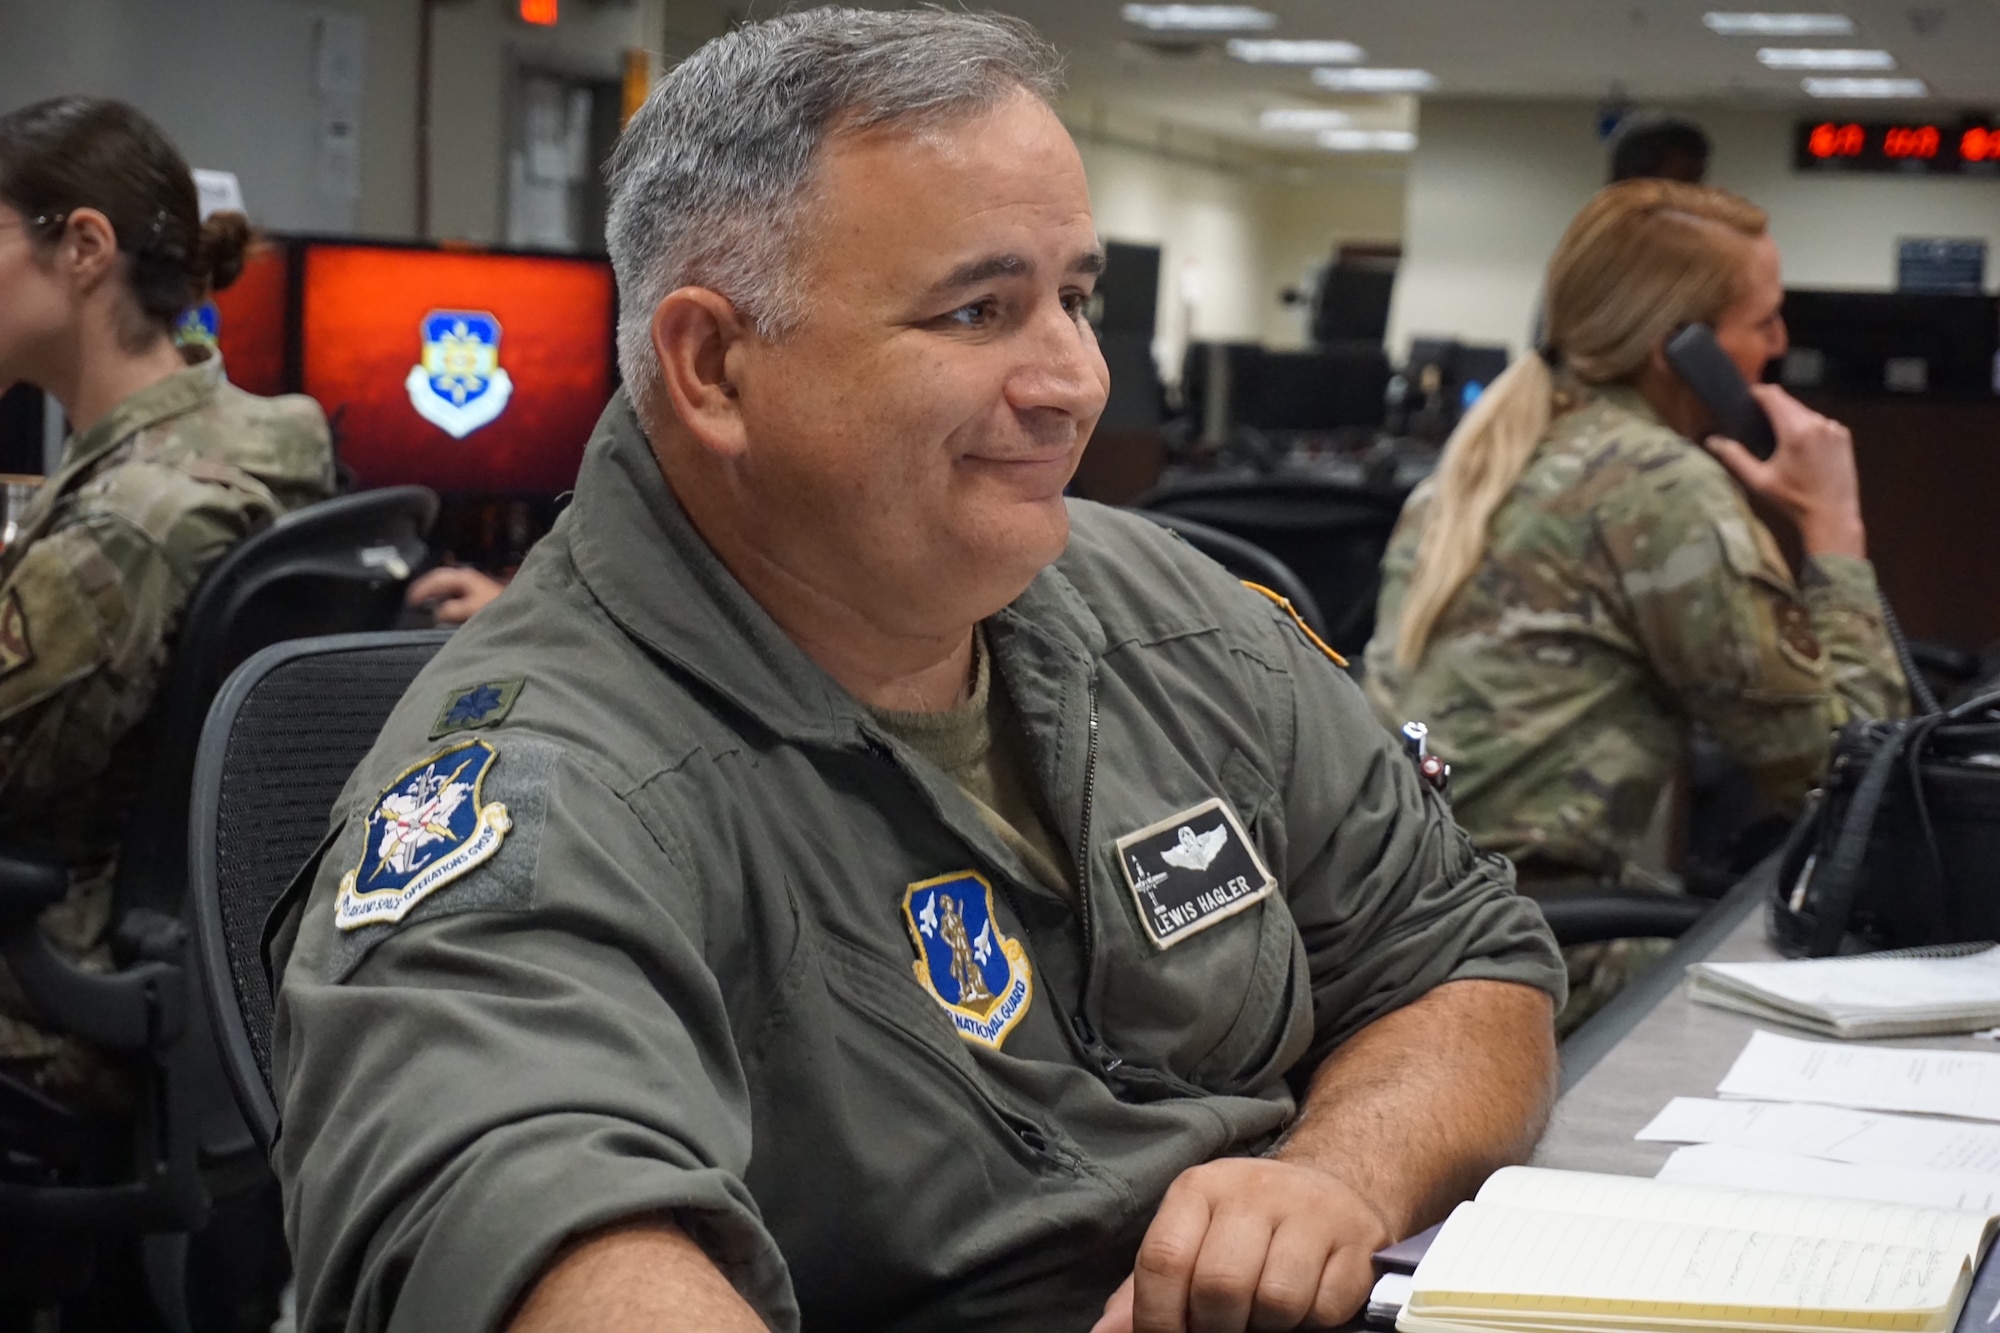 photo of a uniformed U.S. ANG Airman sitting at table filled with computers with other U.S. Air Force Airmen working in the background